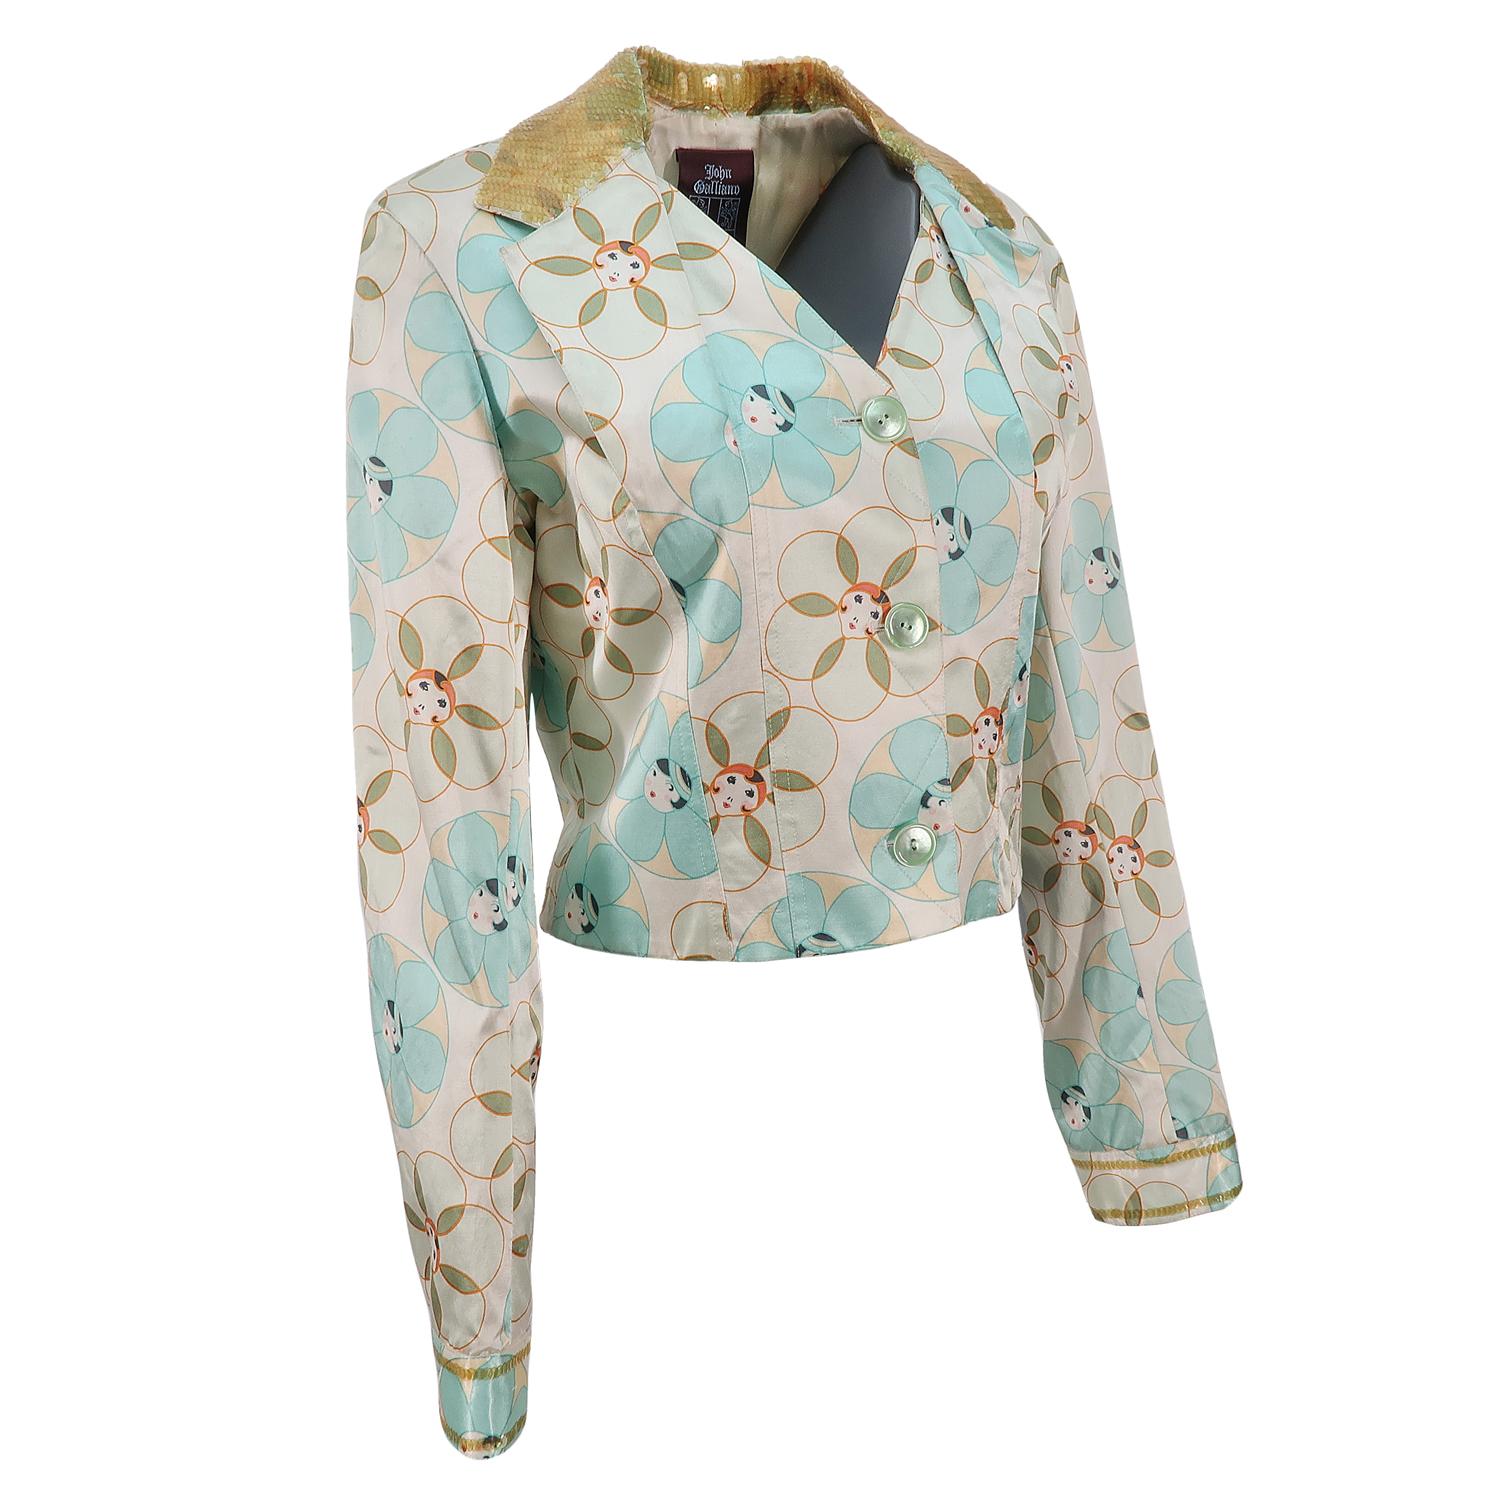 Hollywood Glamour was always on John Galliano’s mind and his penchant for opulence is the stuff of fashion legends. This adorable printed jacket, whose collar and sleeves are embellished with shimmery sequins, emphasizes the chest and underlines the